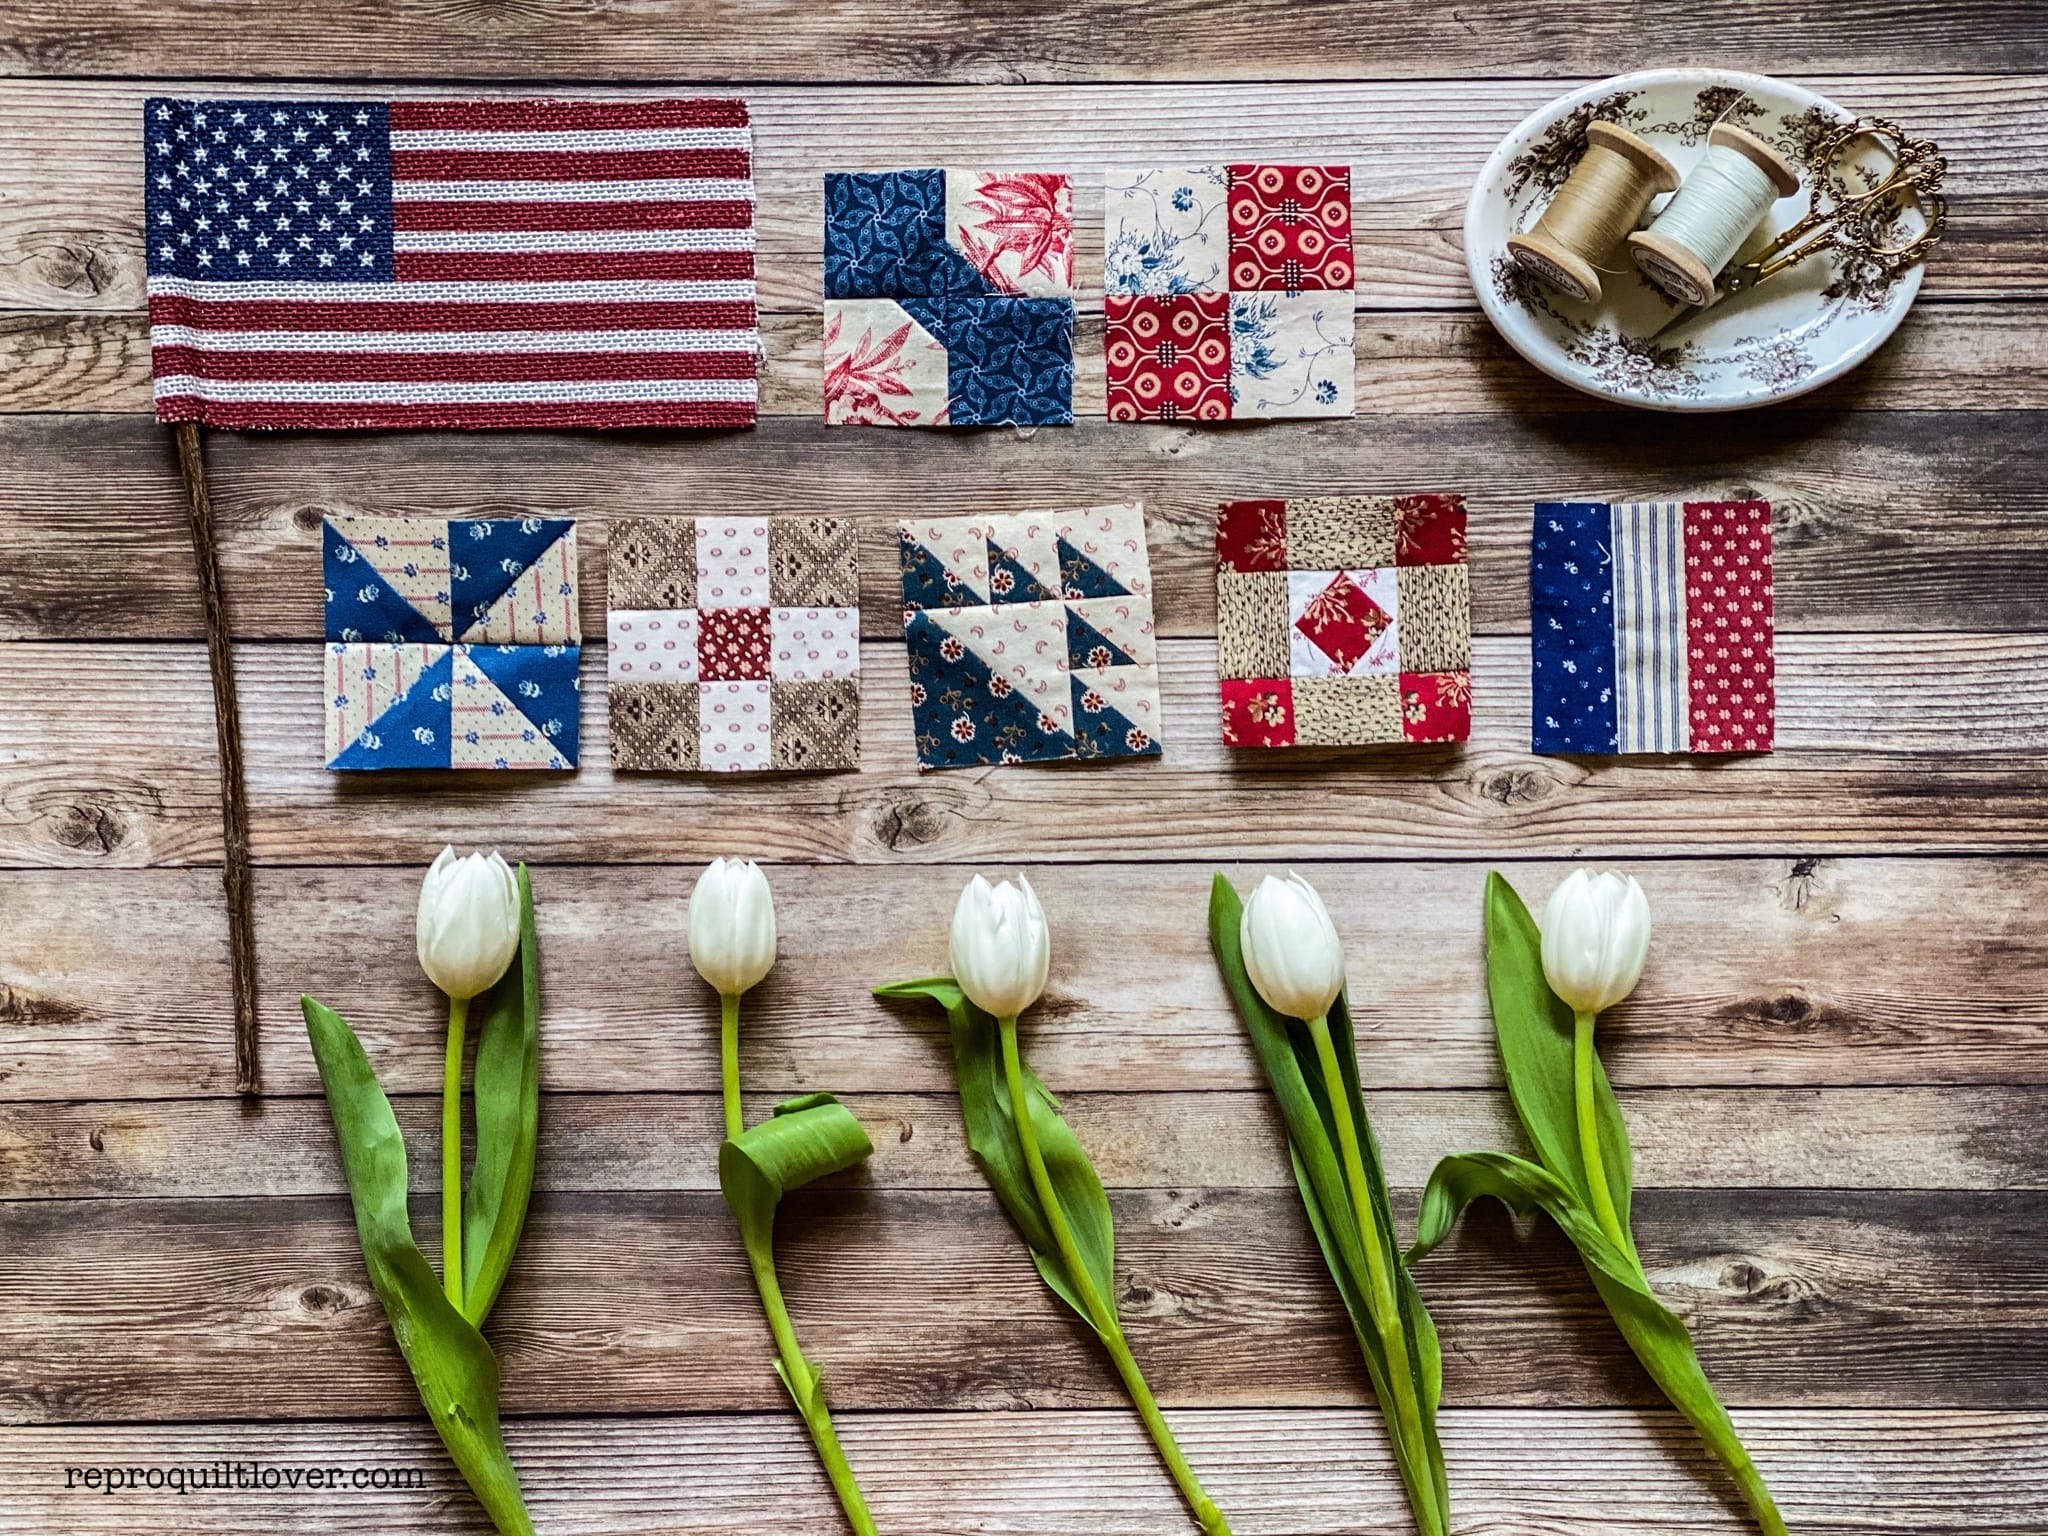 Last Minute July 4th Projects: Five fun, free and festive online ideas